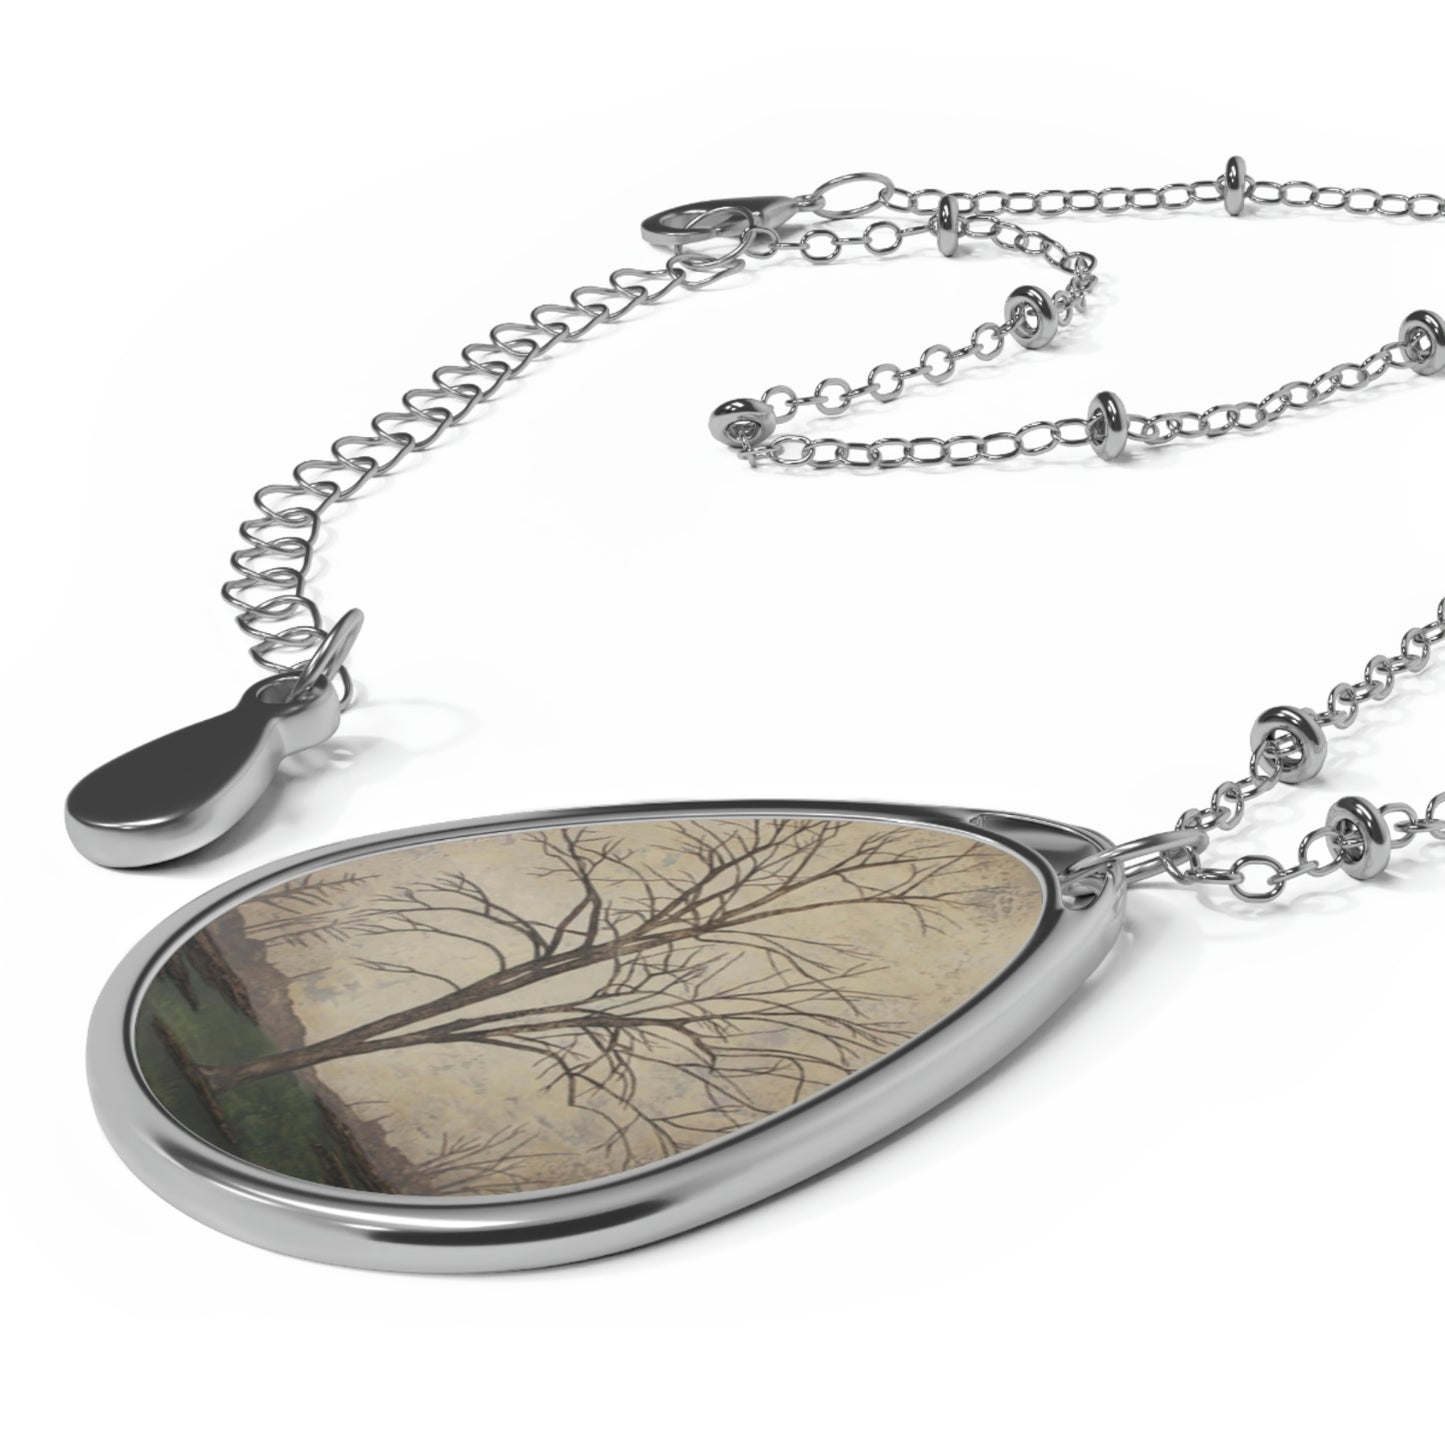 Art Necklace - Time to Think